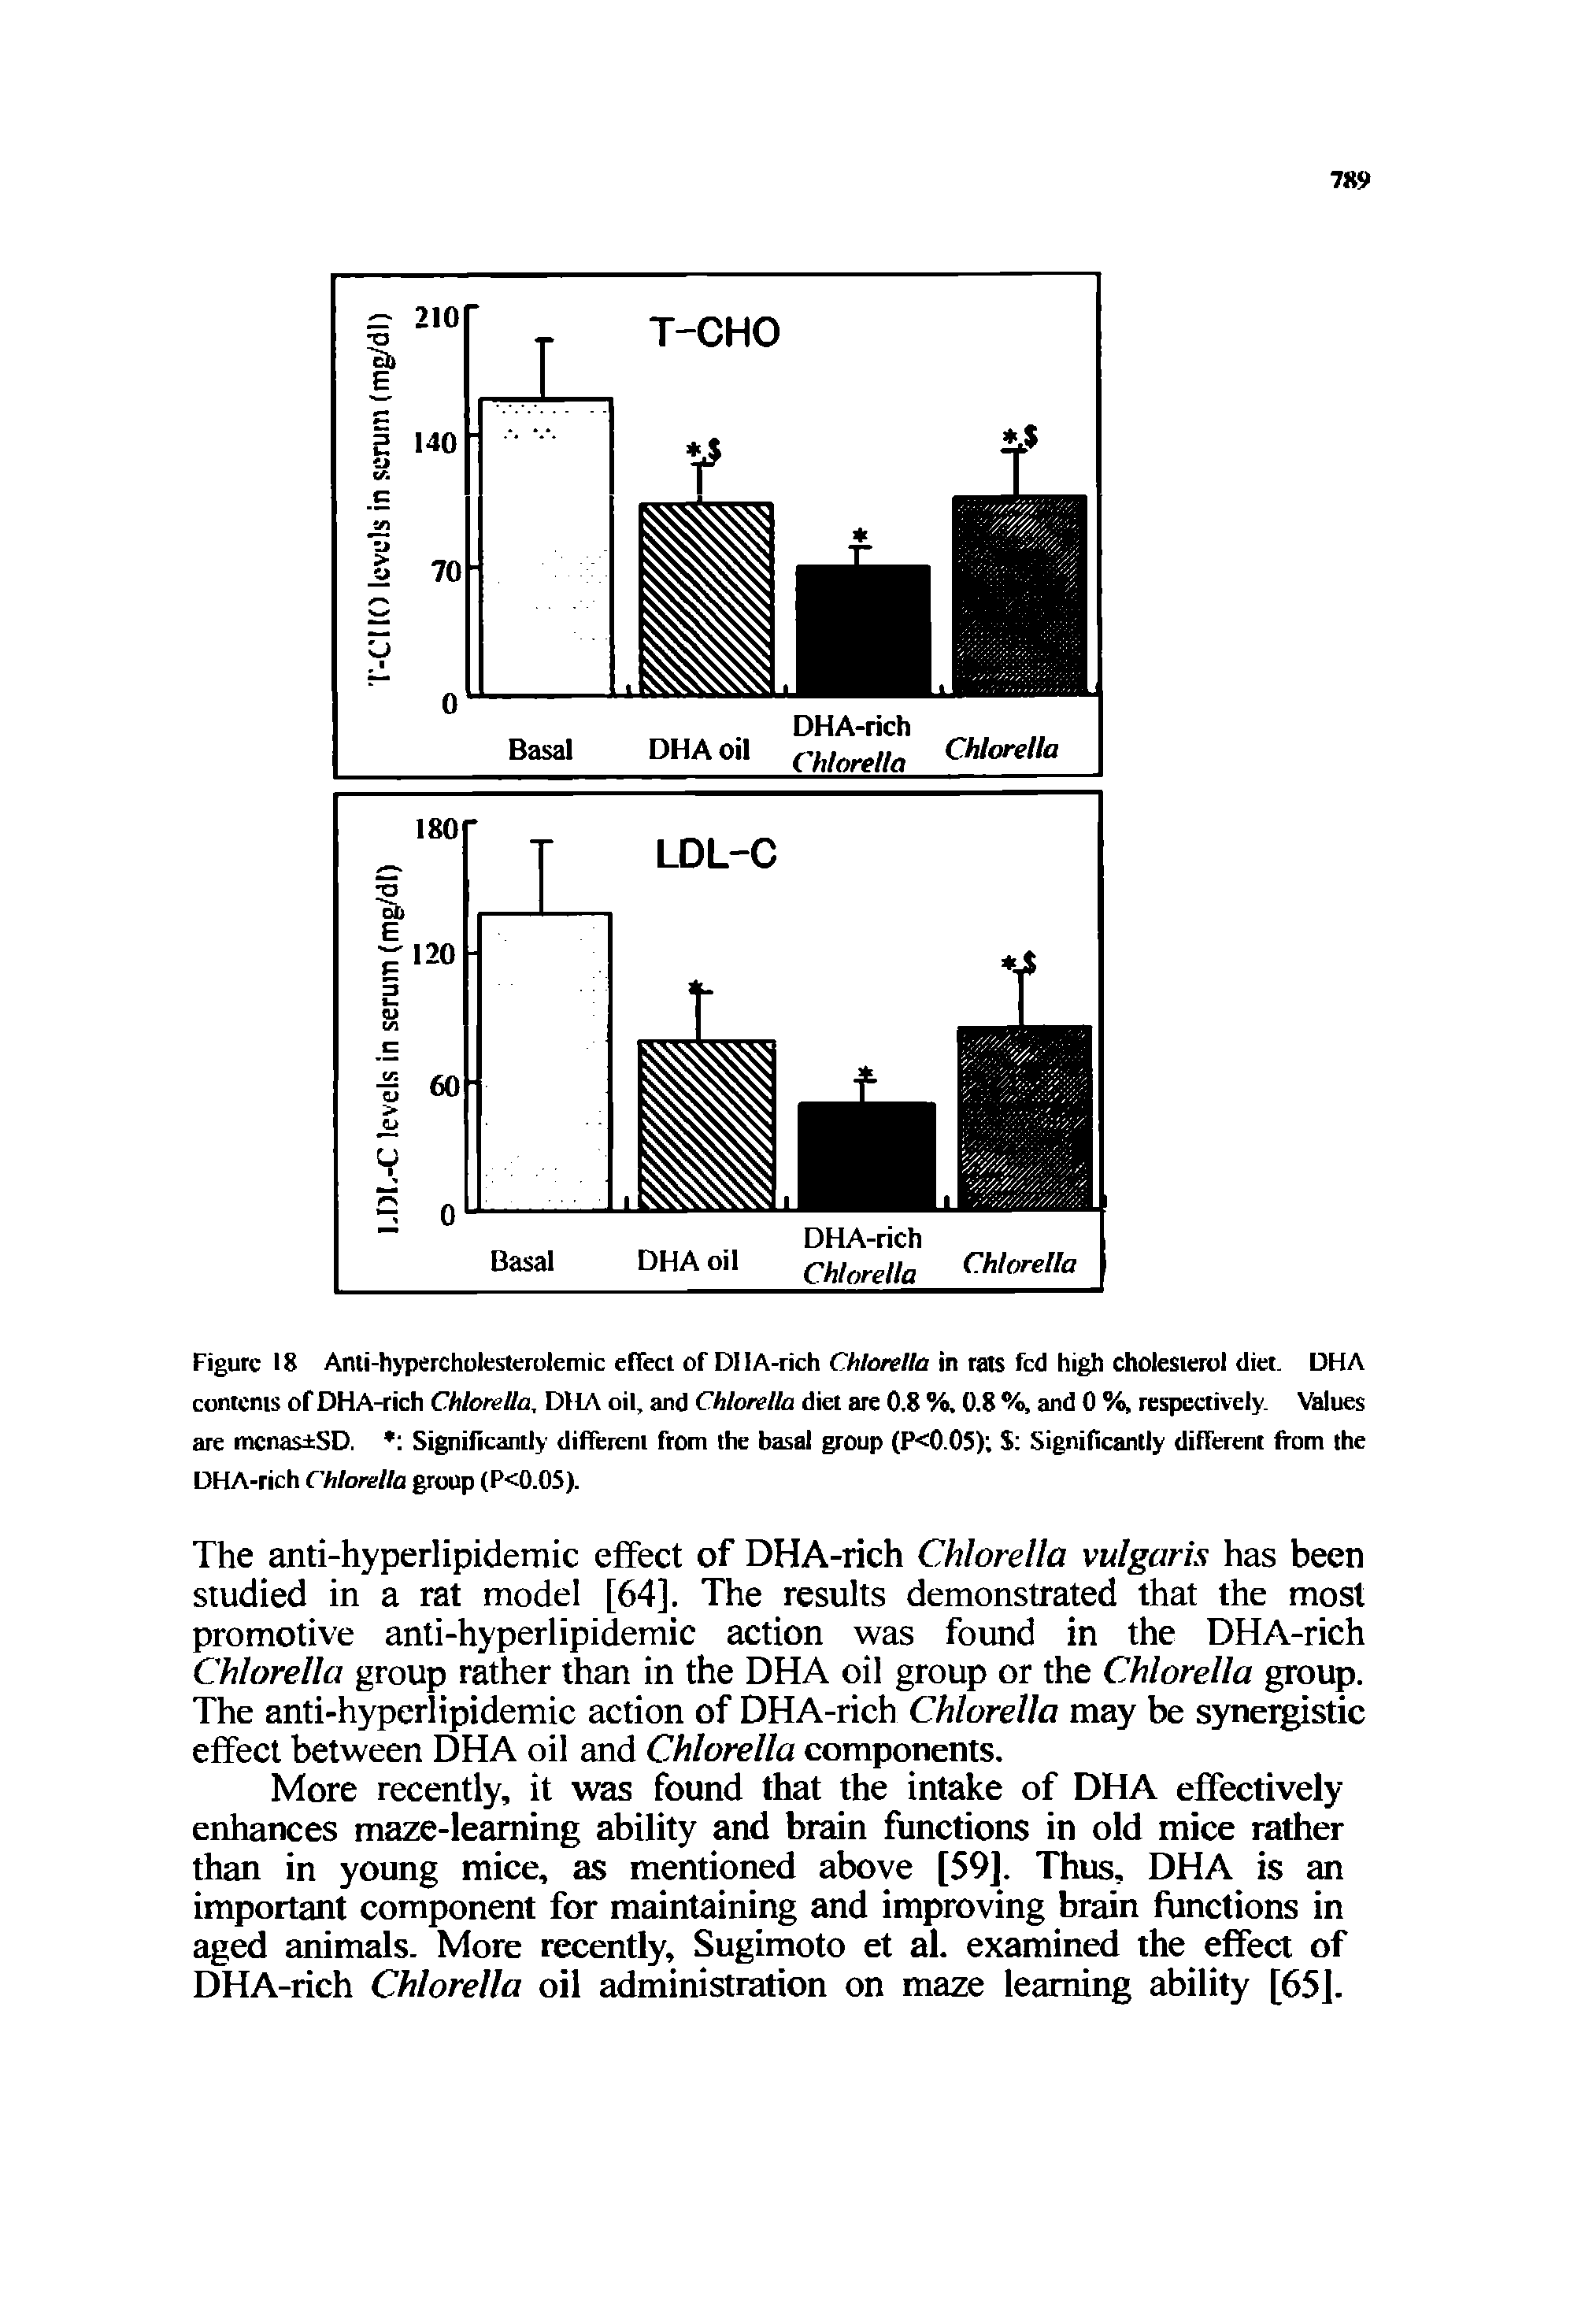 Figure 18 Anti-hypercholesterolemic effect of DIIA-rich Chlorella in rats fed high cholesterol diet. DHA contents of DHA-rich Chlorella, DHA oil, and Chlorella diet are 0.8 %. 0.8 %, and 0 %, respectively. Values are mcnas SD. Significantly different from the basal group (P<005) S Significantly different from the DHA-rich Chlorella group (P<0.05).